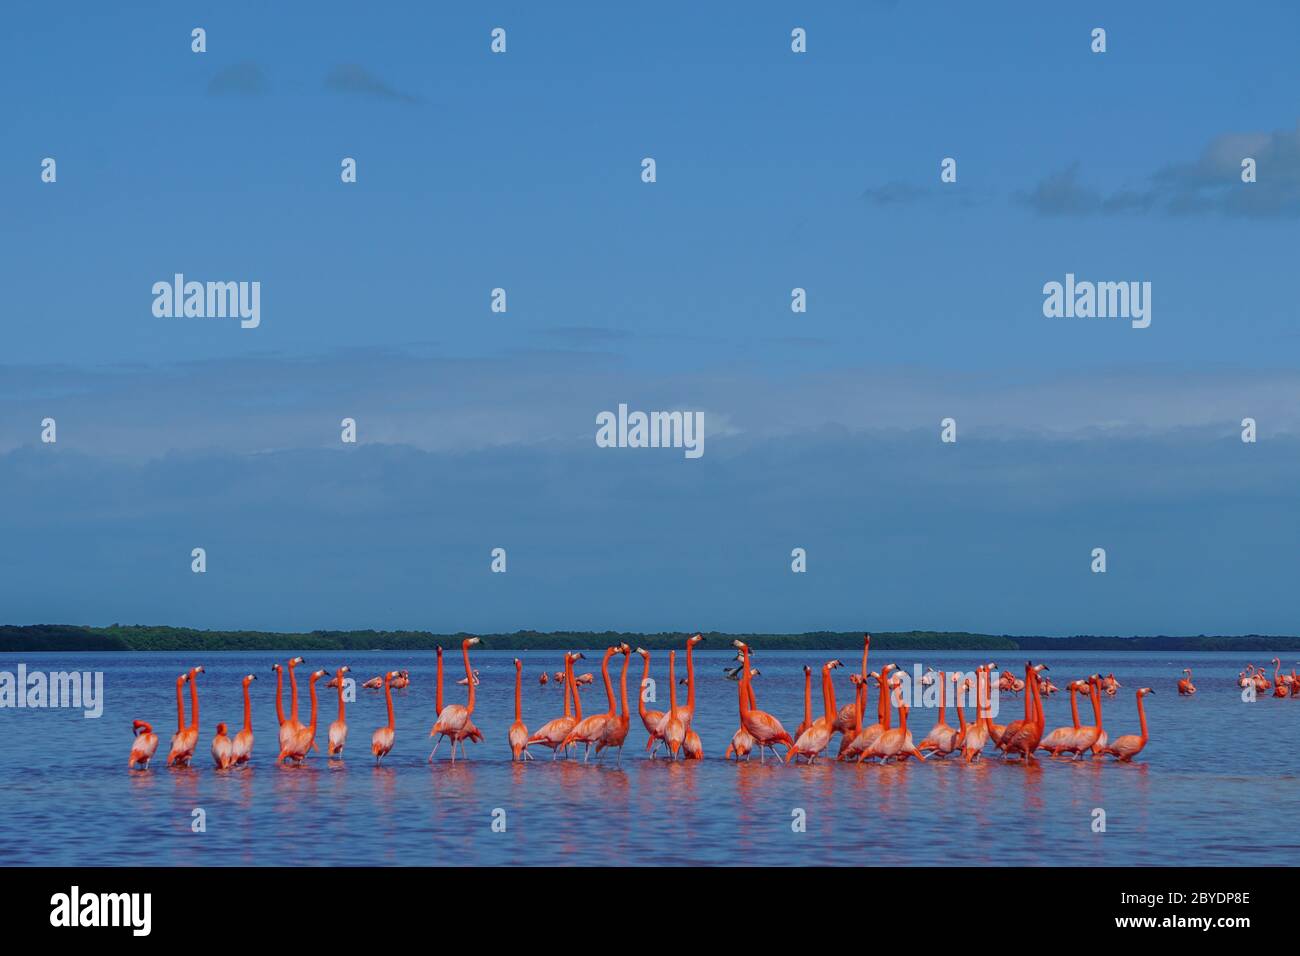 Celestun, Yucatan, Mexico: American flamingos - Phoenicopterus ruber -  wading in the shallow waters of the Celestun Biosphere Reserve. Stock Photo